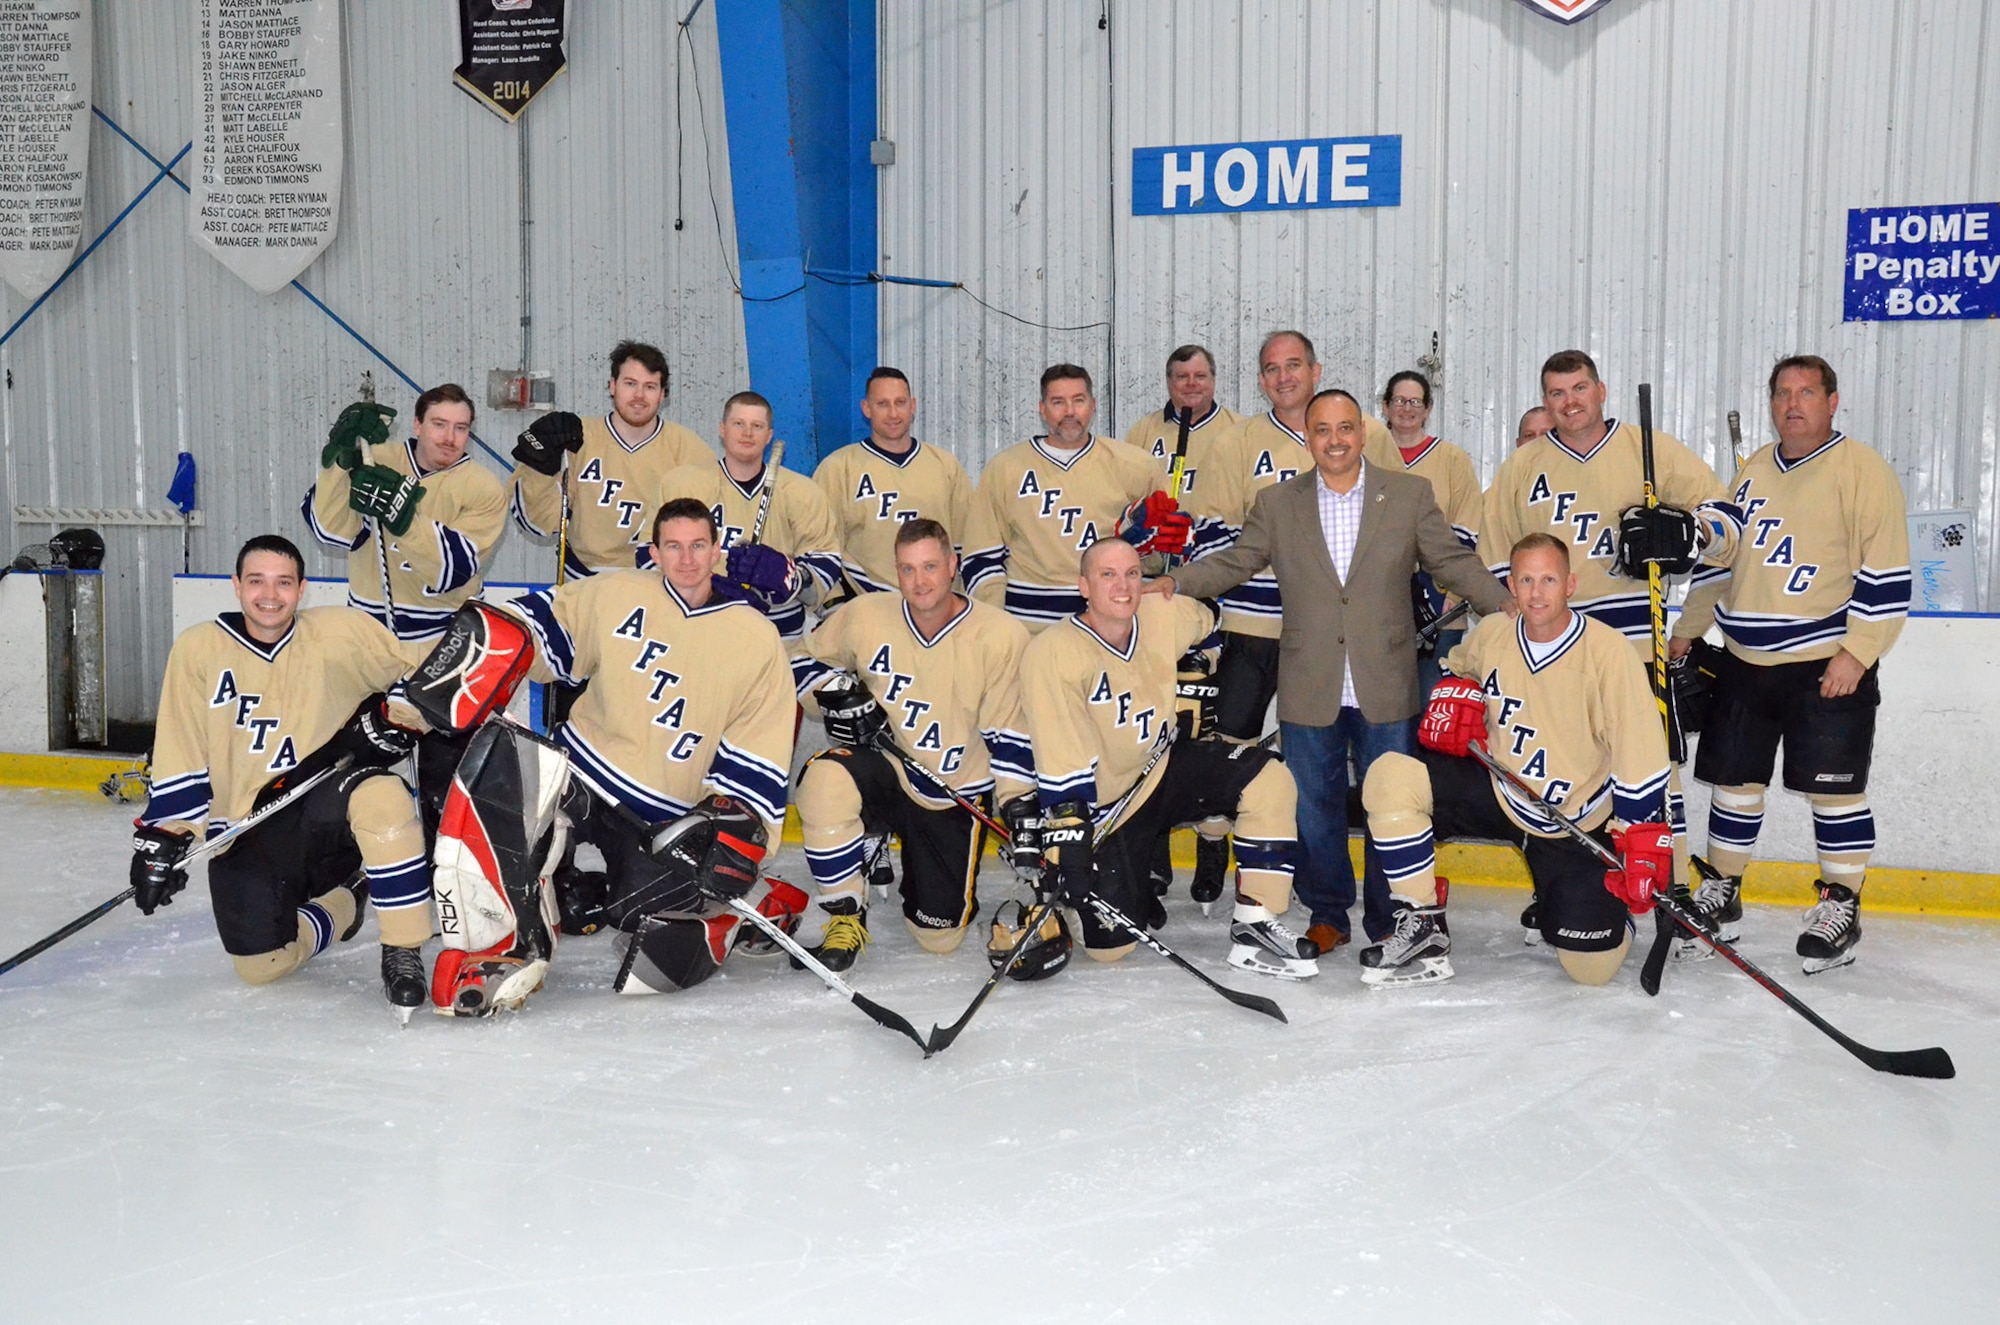 Rob Medina, Director of Community Relations for Congressman Bill Posey (FL-15), poses with members of the Athletes for Teamwork and Charity hockey team March 24, 2018.  The team is comprised of members of the Air Force Technical Applications Center at Patrick AFB, Fla.  Medina presented Certifications of Recognition to the Airmen on behalf of Posey to recognize their service and charitable efforts in the community.  The team faced off against players from Florida Tech at the Space Coast IcePlex in Rockledge, Fla. (U.S. Air Force photo by Susan A. Romano)